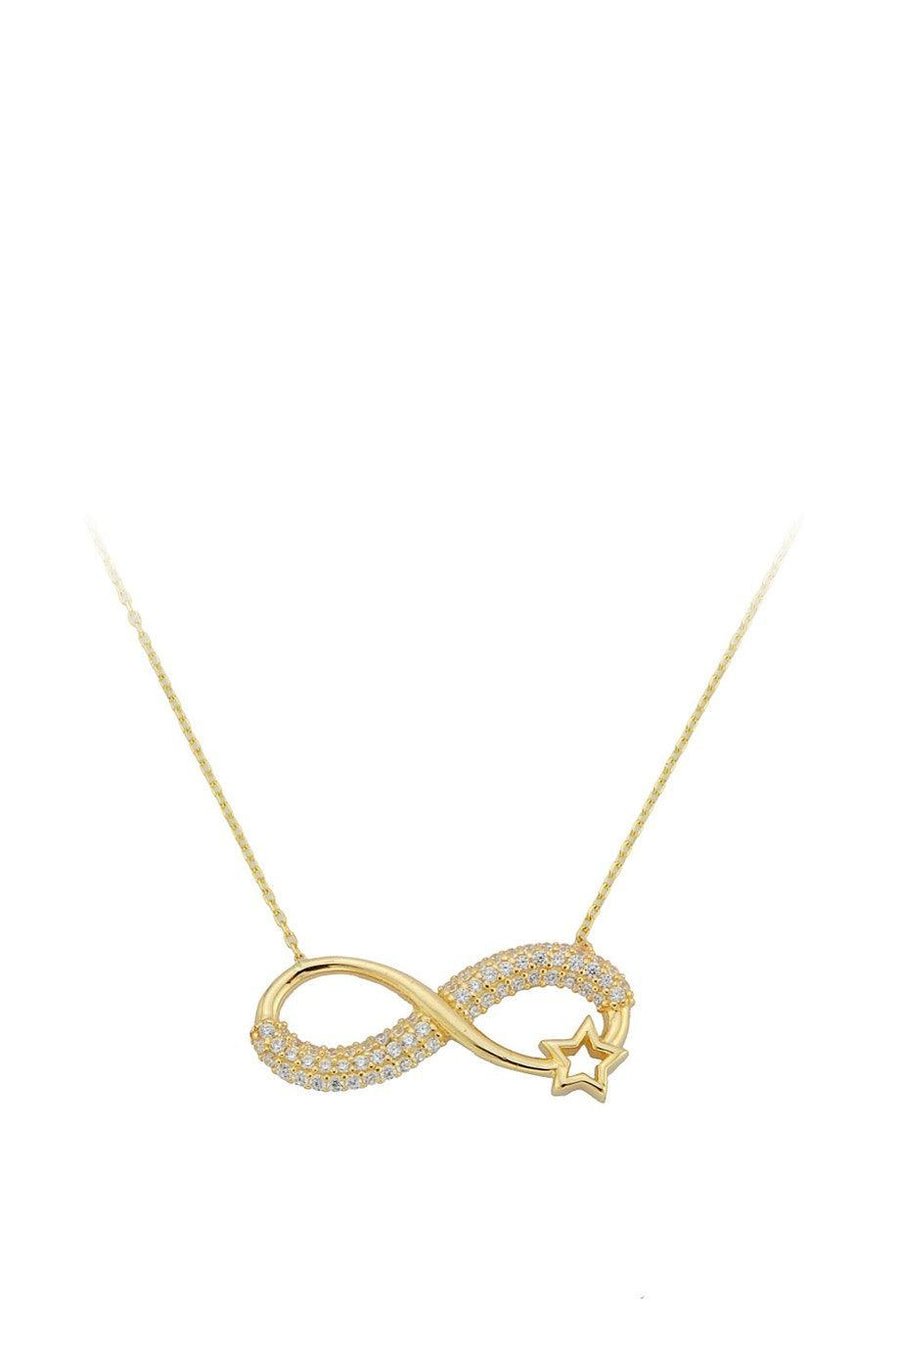 Golden Star Infinity Necklace